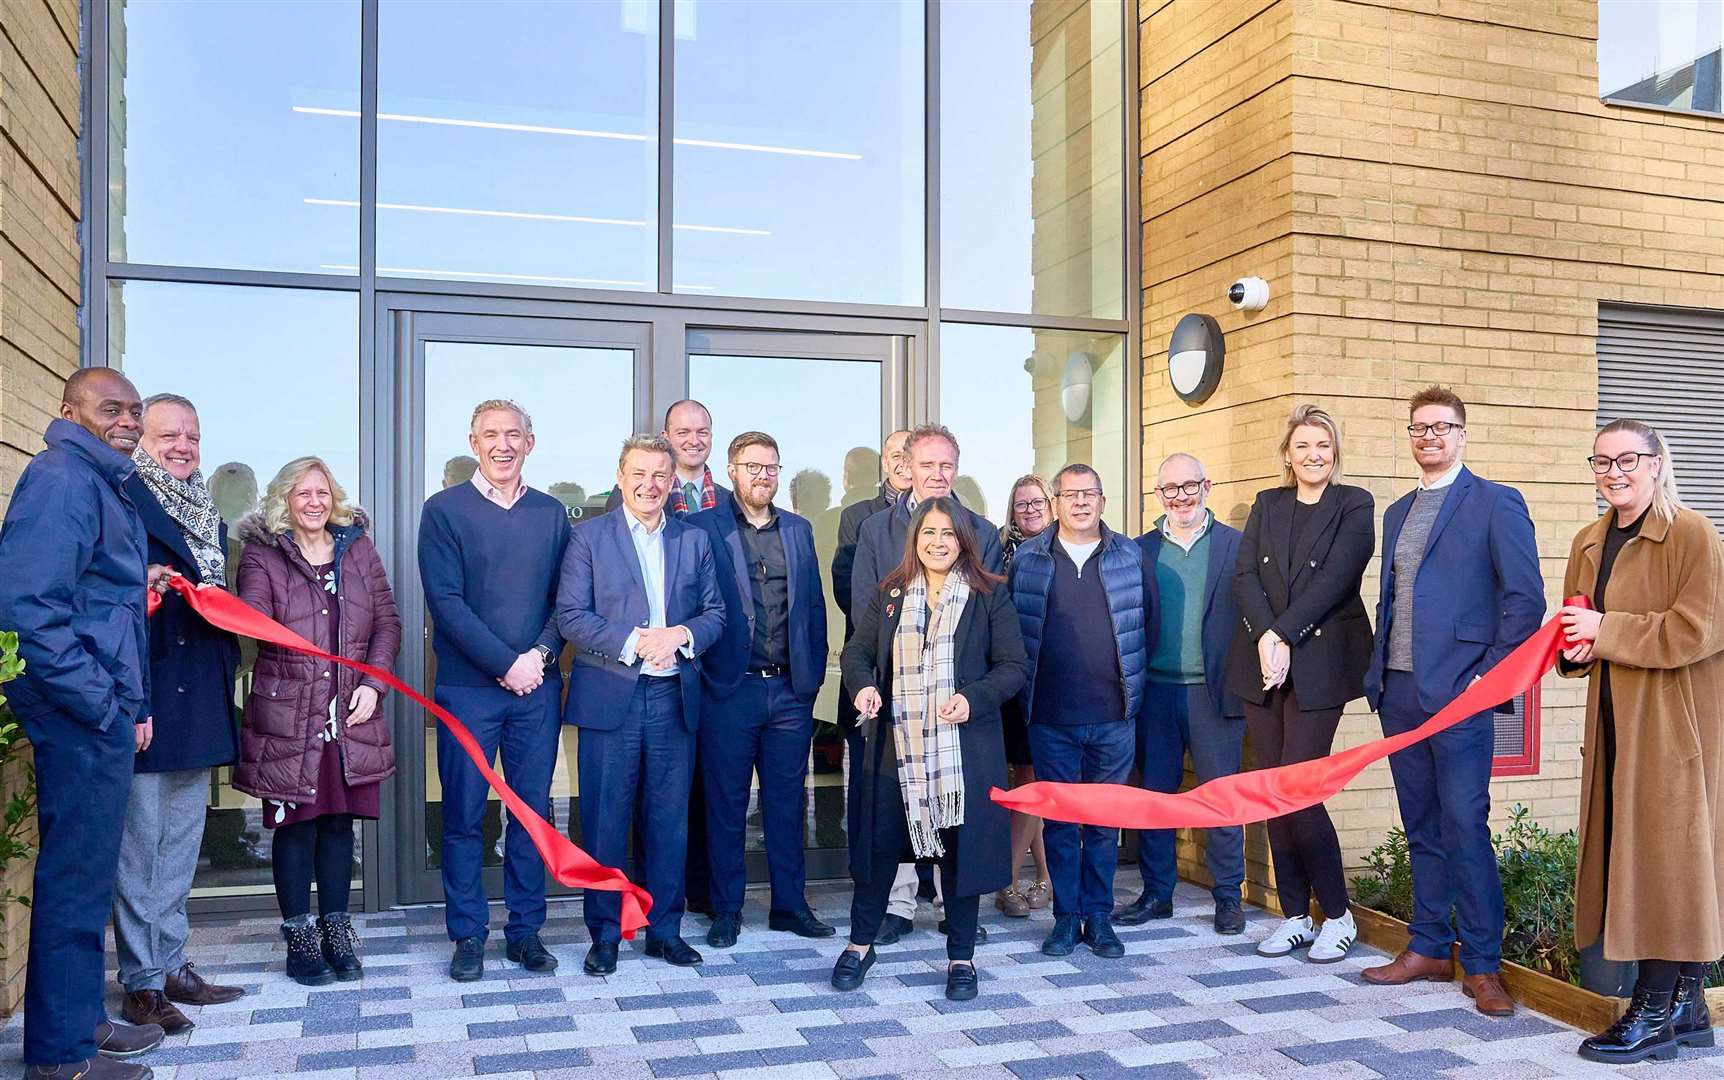 The new development - Cavalier Court- was officially opened on Tuesday. Photo: Josh Caius